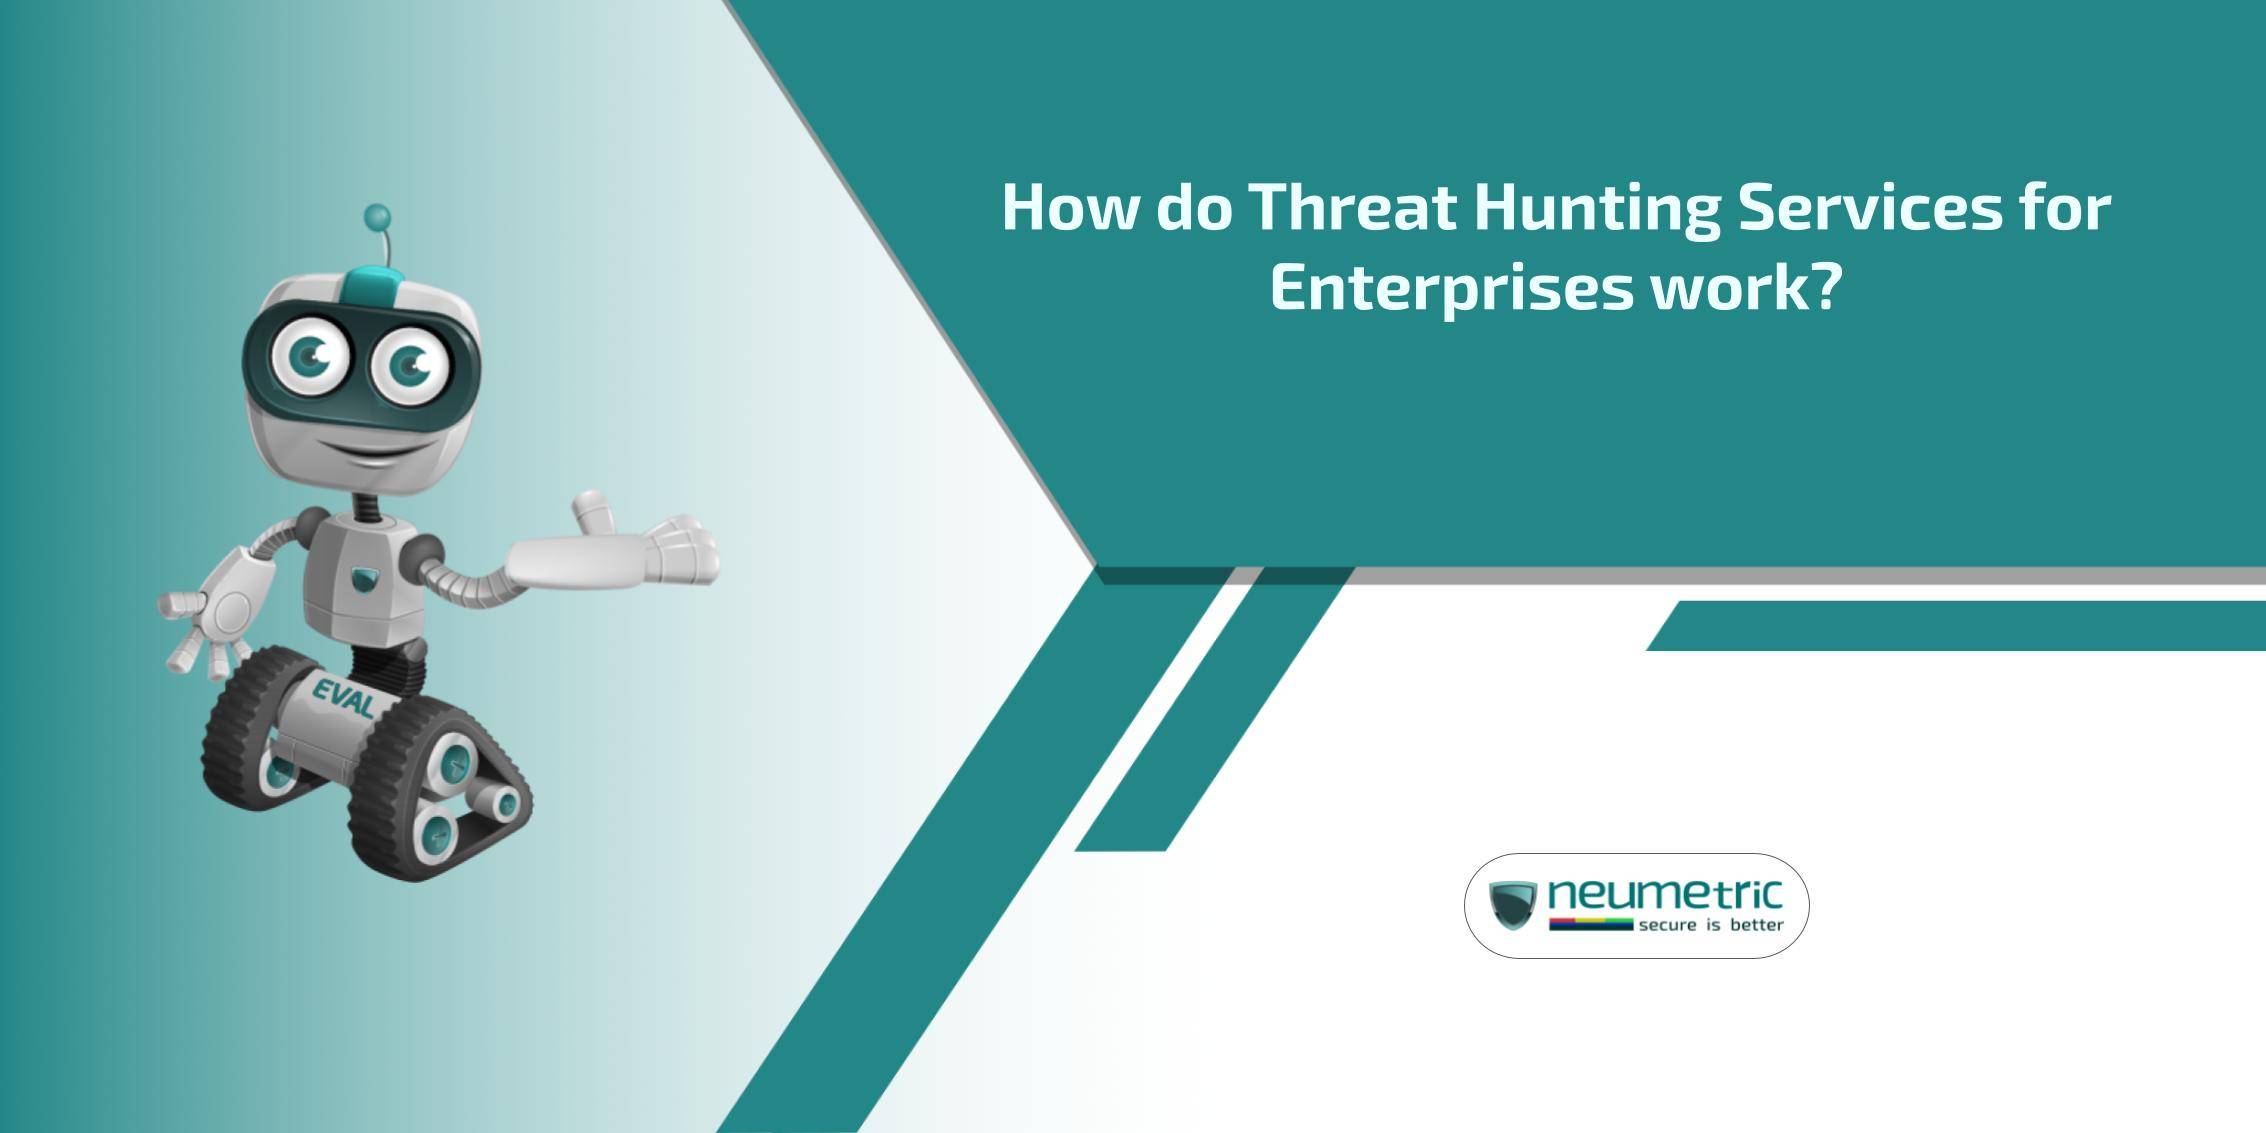 Threat hunting services for enterprises